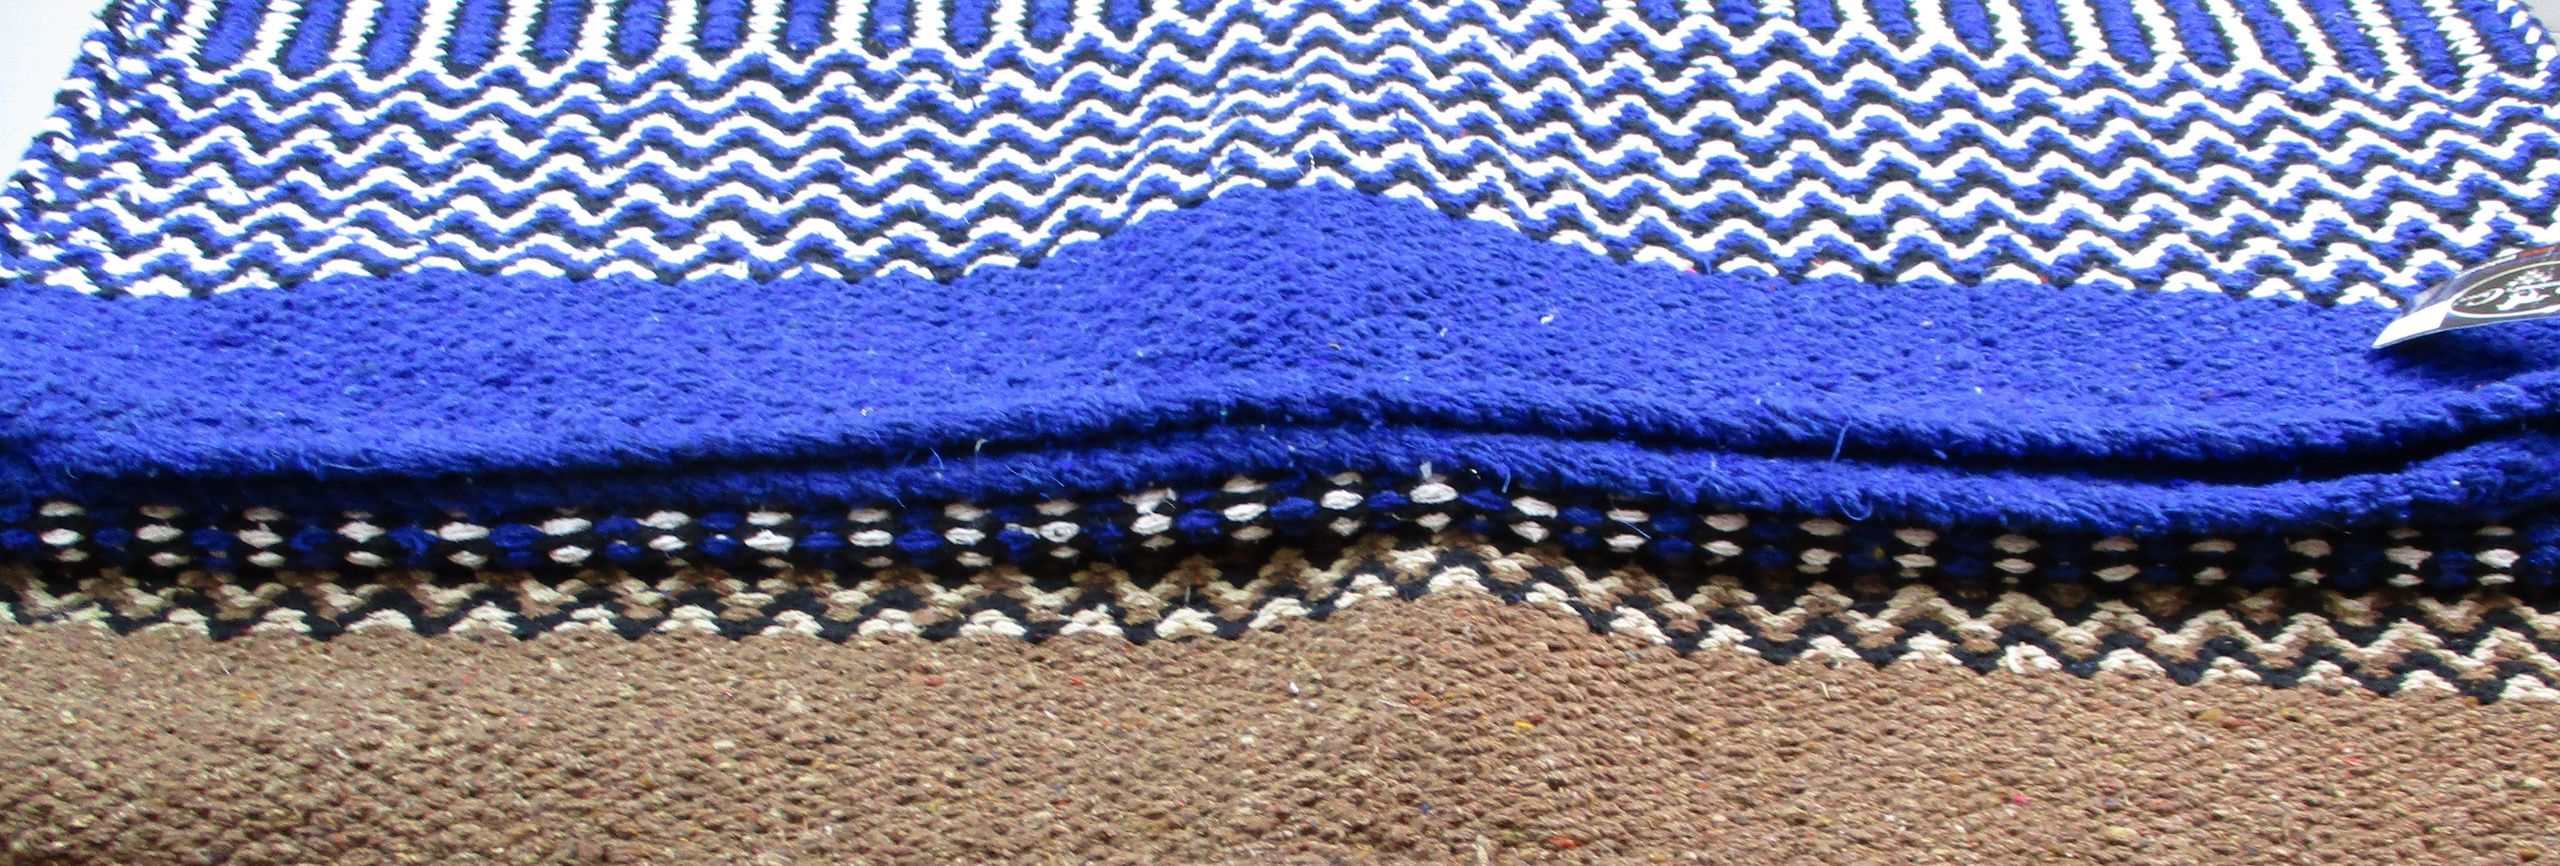 Damron International 32″ x 64″ Double Weave Wool Saddle Blanket Assorted Colors 